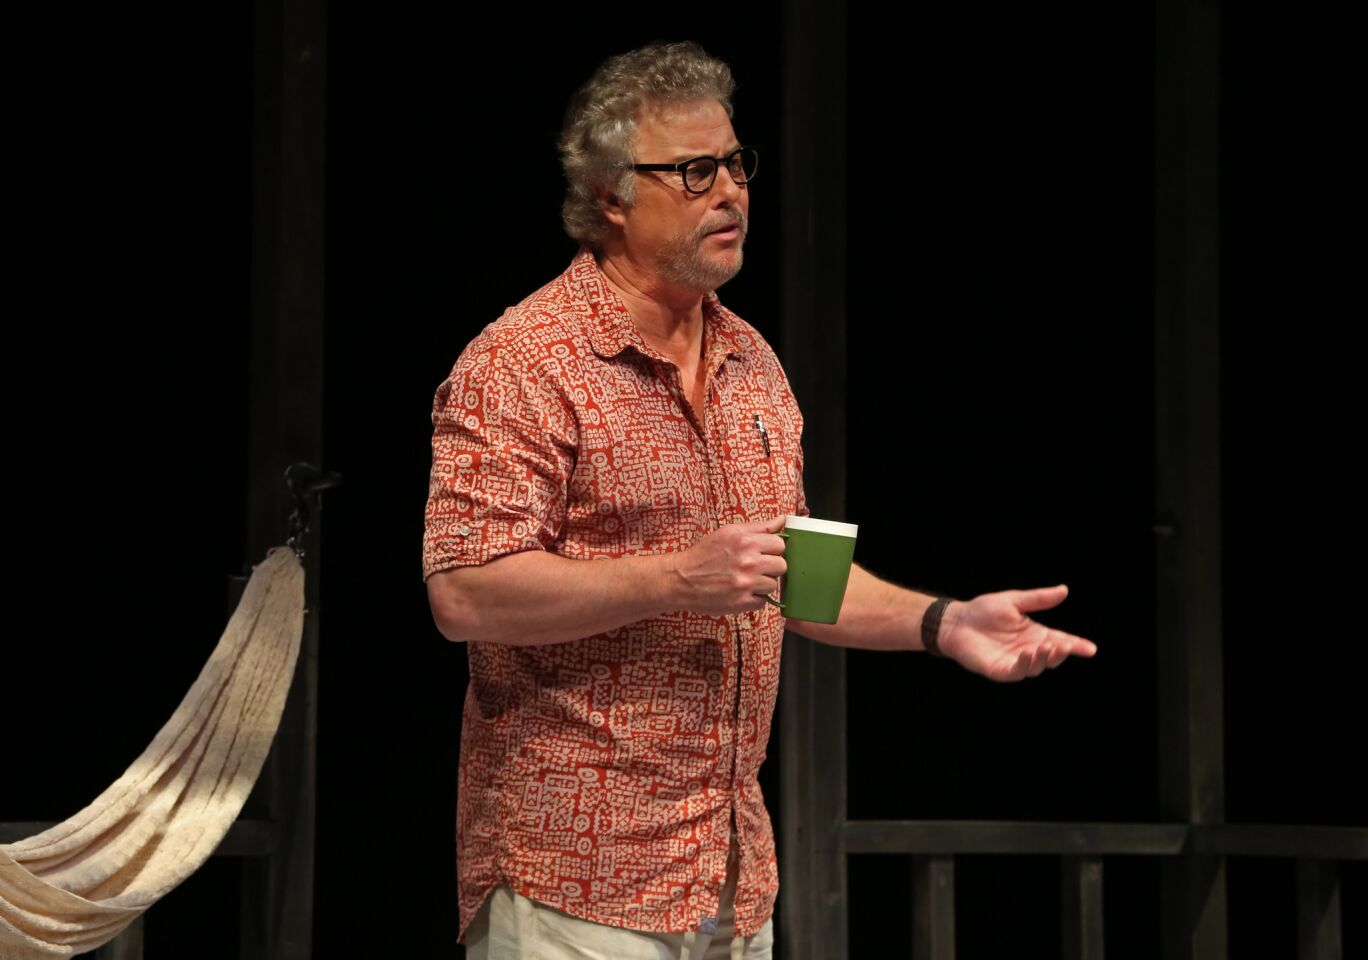 "CSI" alum William Petersen made his Los Angeles stage debut in this year's "Slowgirl" at the Geffen Playhouse.